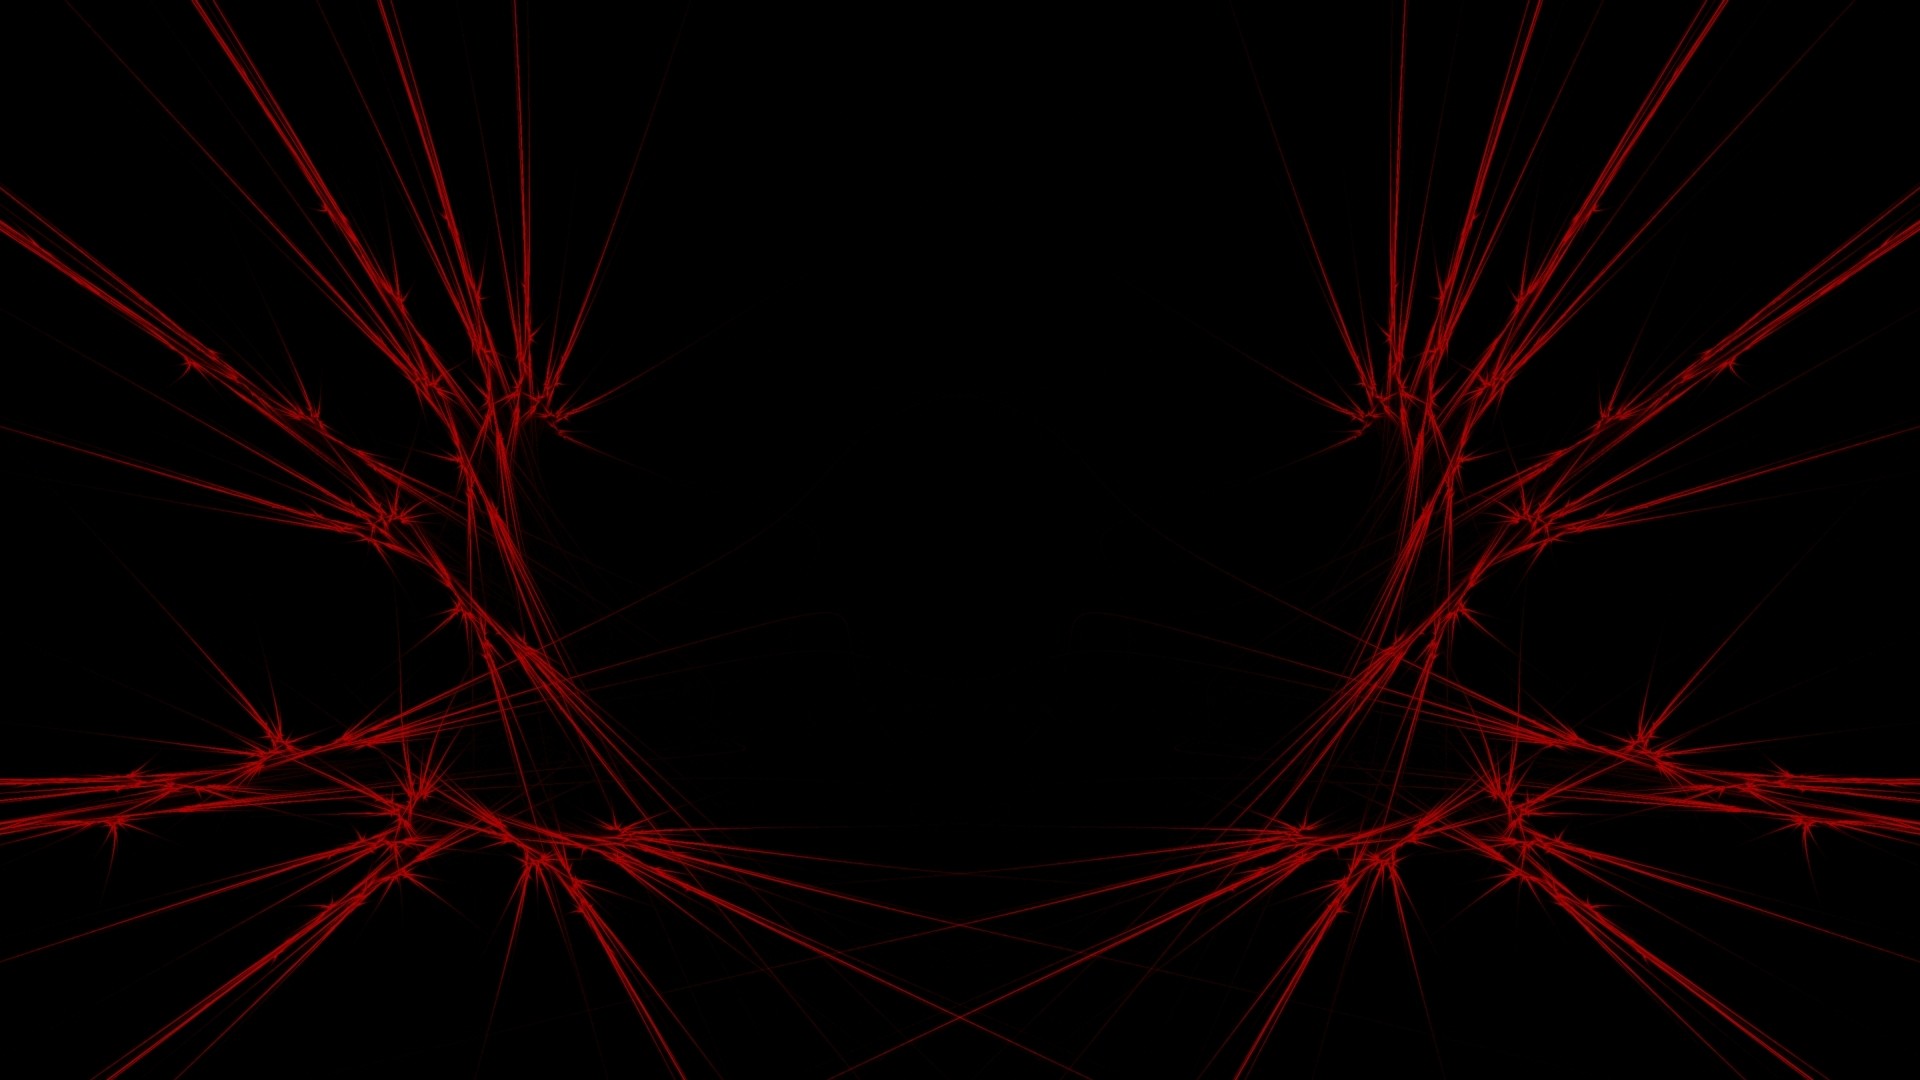 Red And Black Abstract Backgrounds (62+ Pictures)